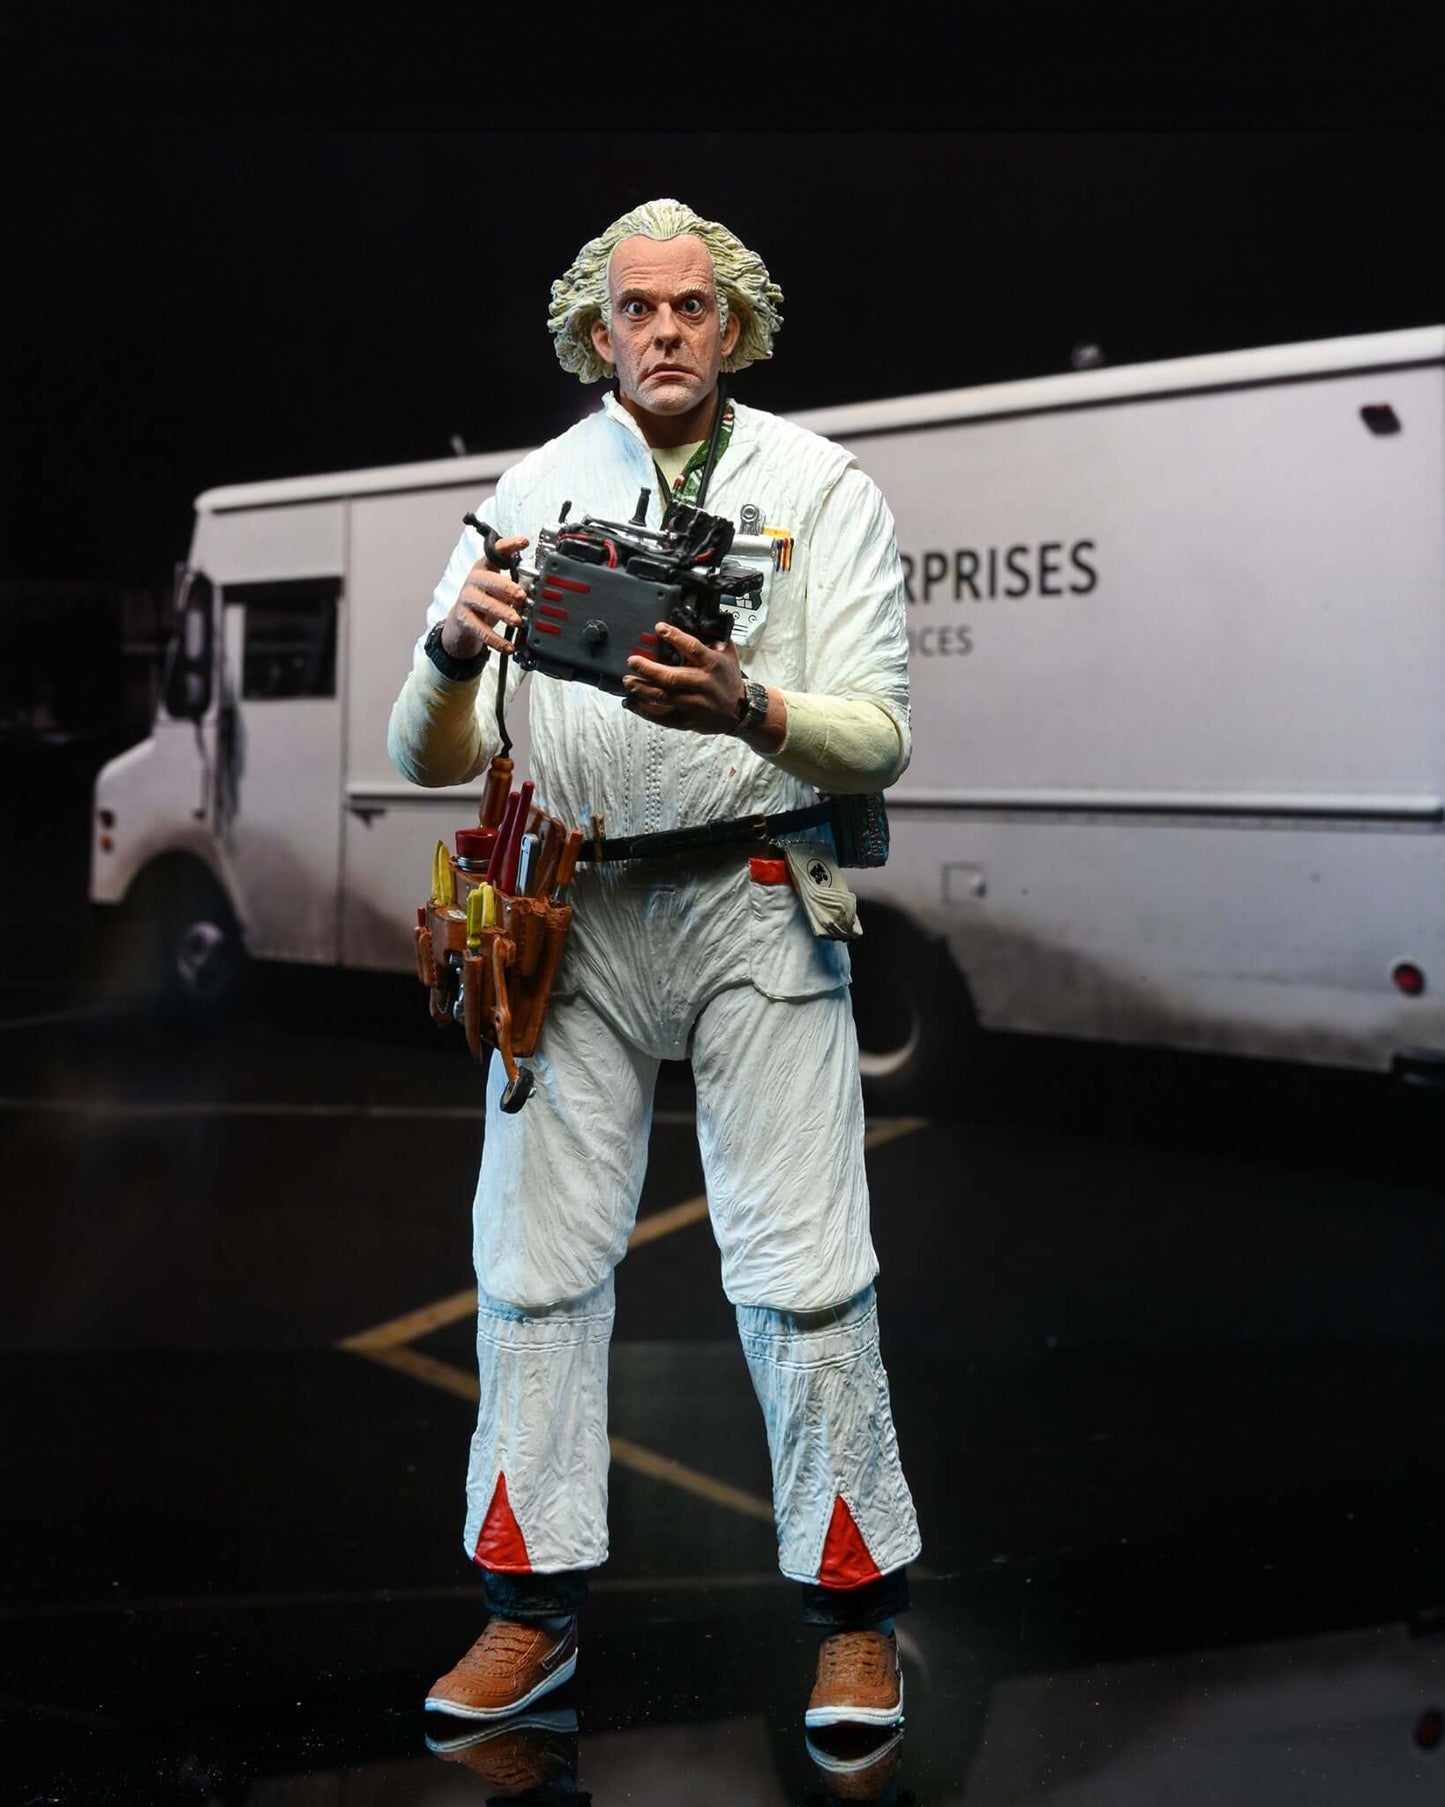 BACK TO THE FUTURE ULTIMATE 7" SCALE ACTION FIGURE - HAZMAT SUIT DOC BROWN